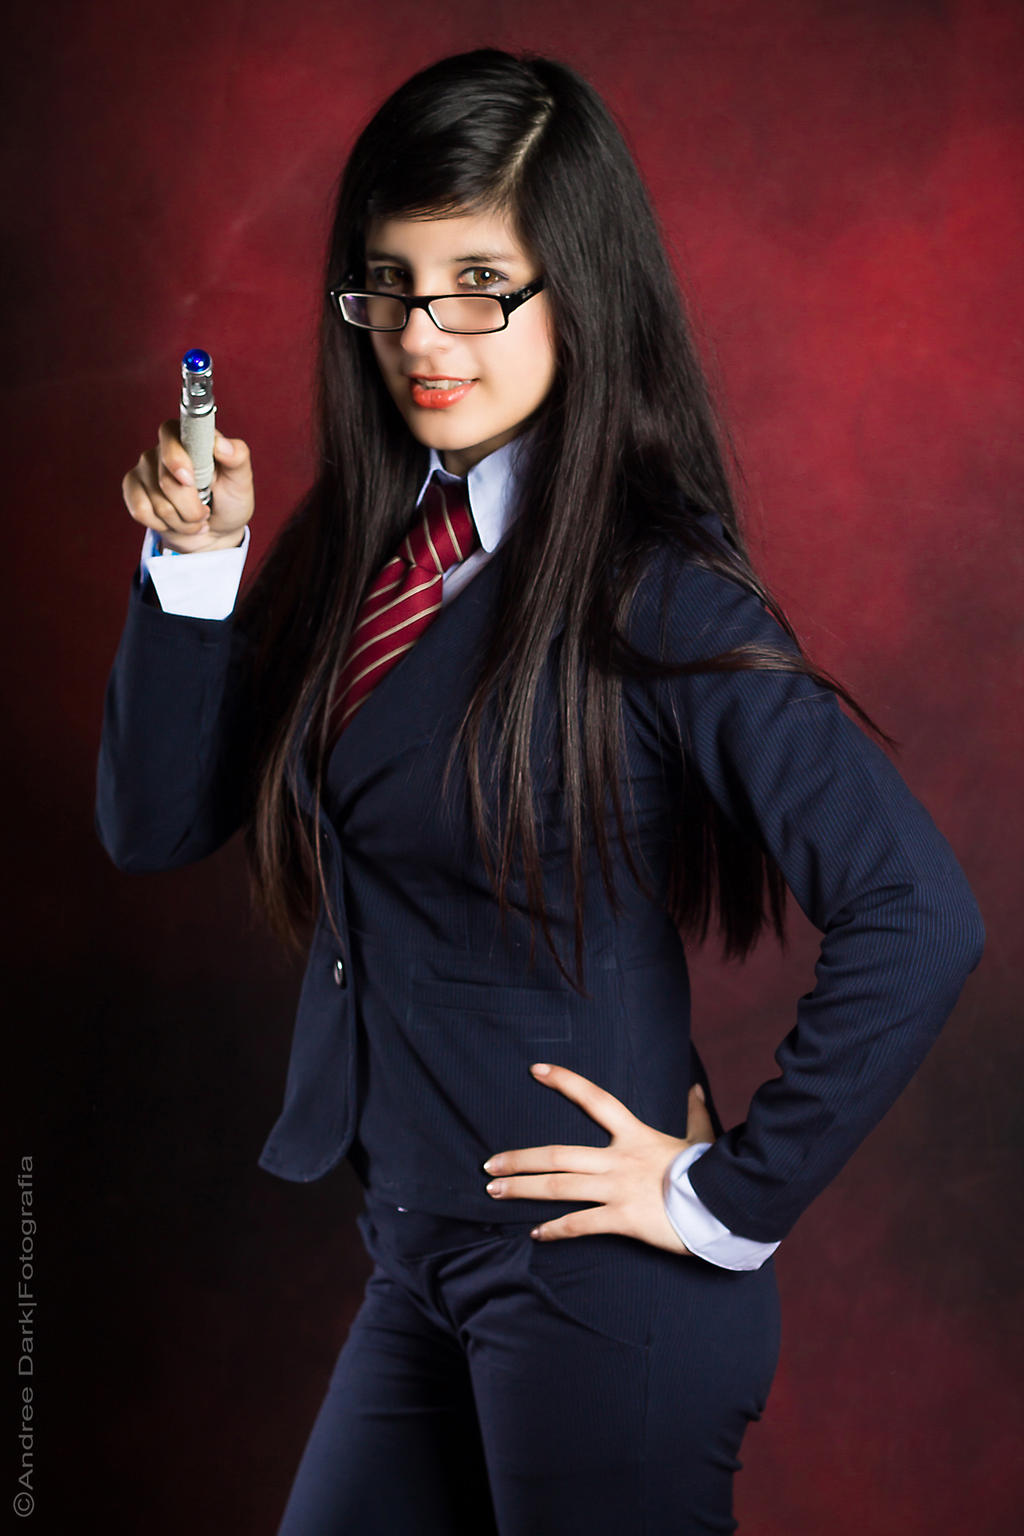 Doctor who female cosplay